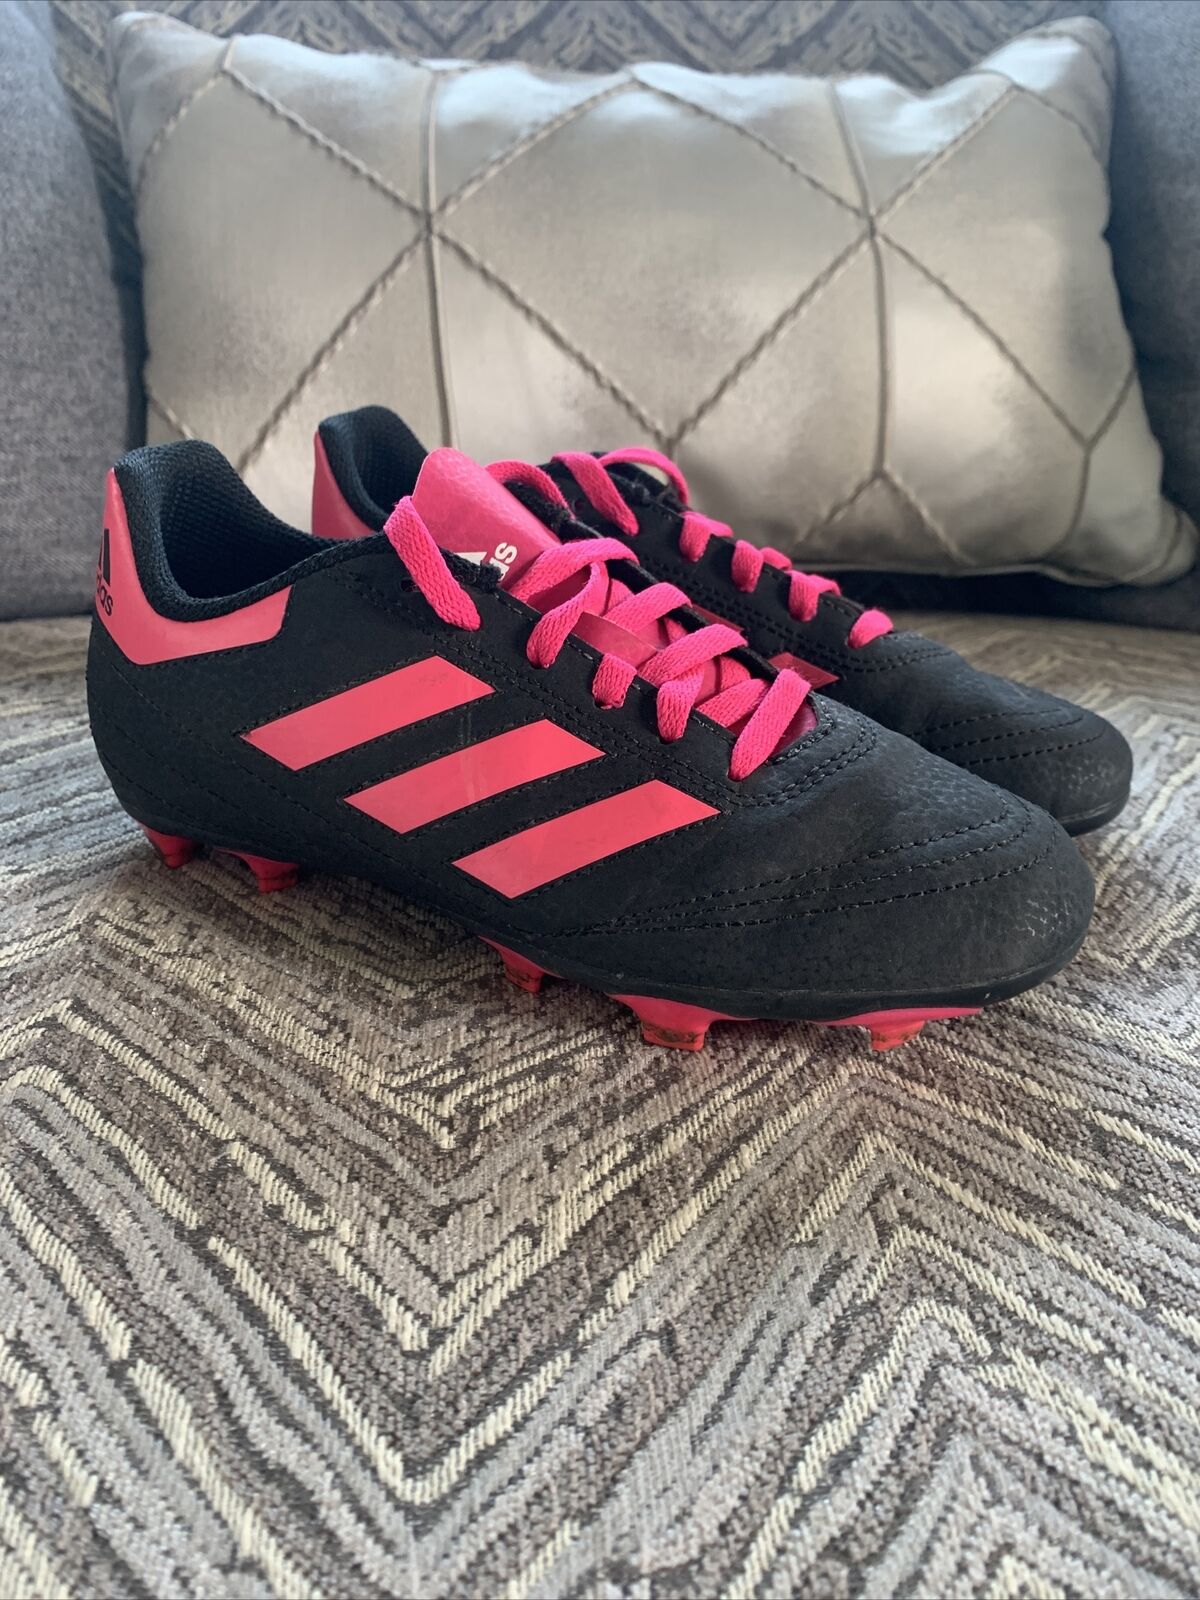 YOUTH GIRLS ADIDAS GOLETTO VII FGJ BLACK PINK SOCCER CLEATS SHOES-SIZE 2